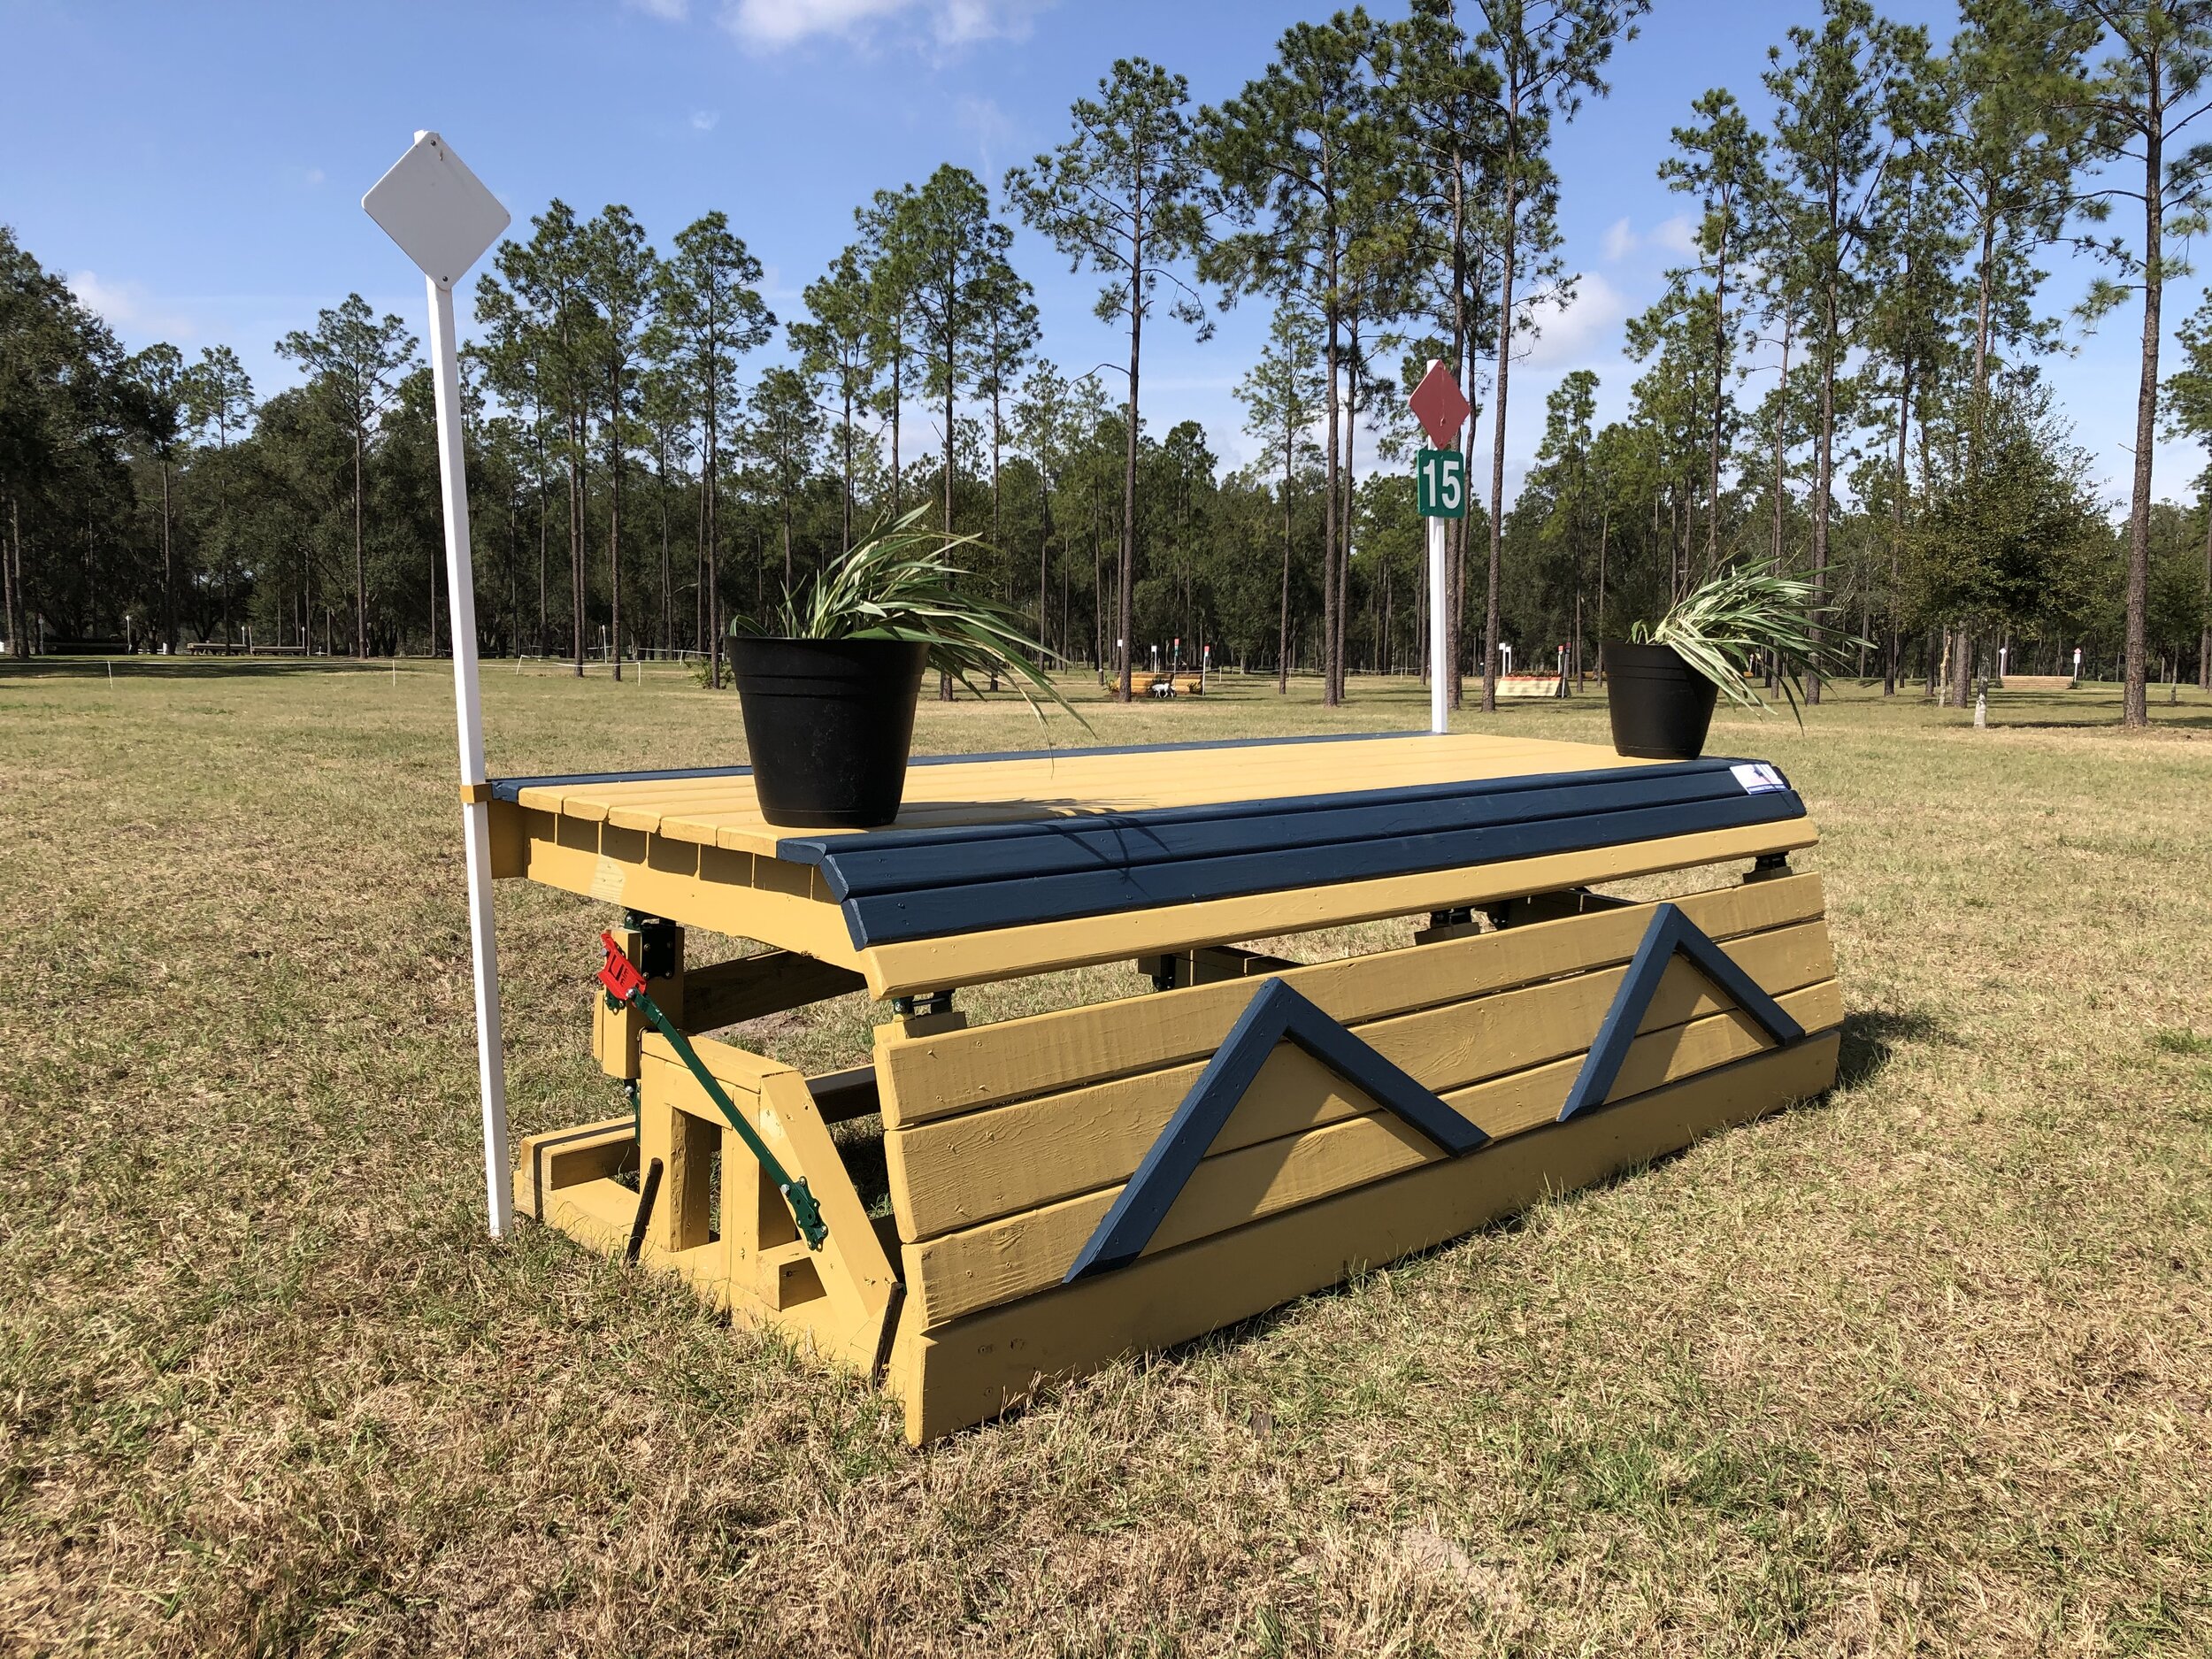  A new Preliminary frangible table at the Three Lakes Horse Trials at Caudle Ranch, built by Morgan Rowsell. 